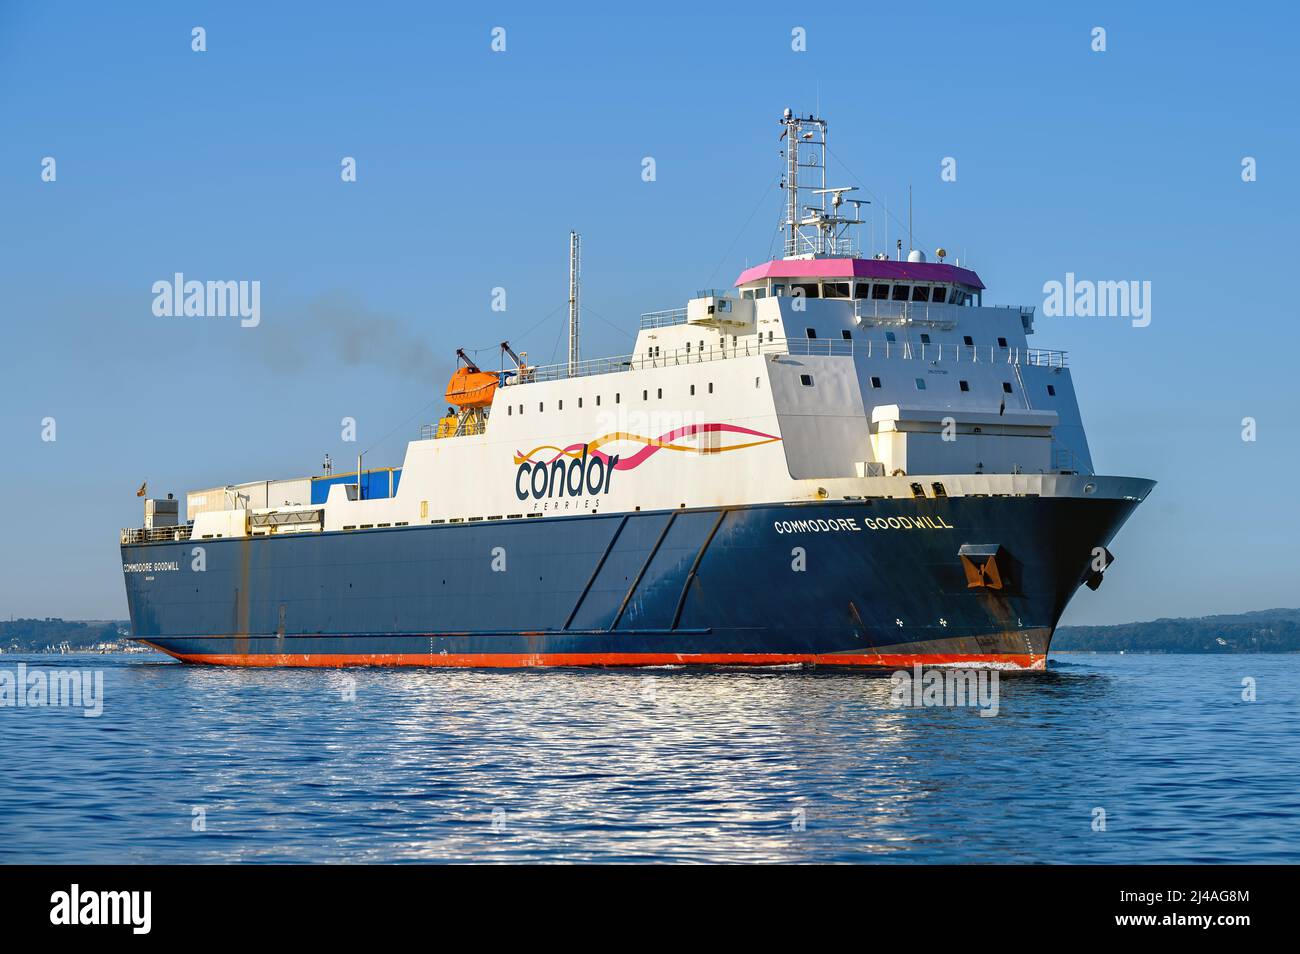 Commodore Goodwill is a RO-RO ferry operated by Condor Ferries between Portsmouth and the Channel Islands - July 2021. Stock Photo